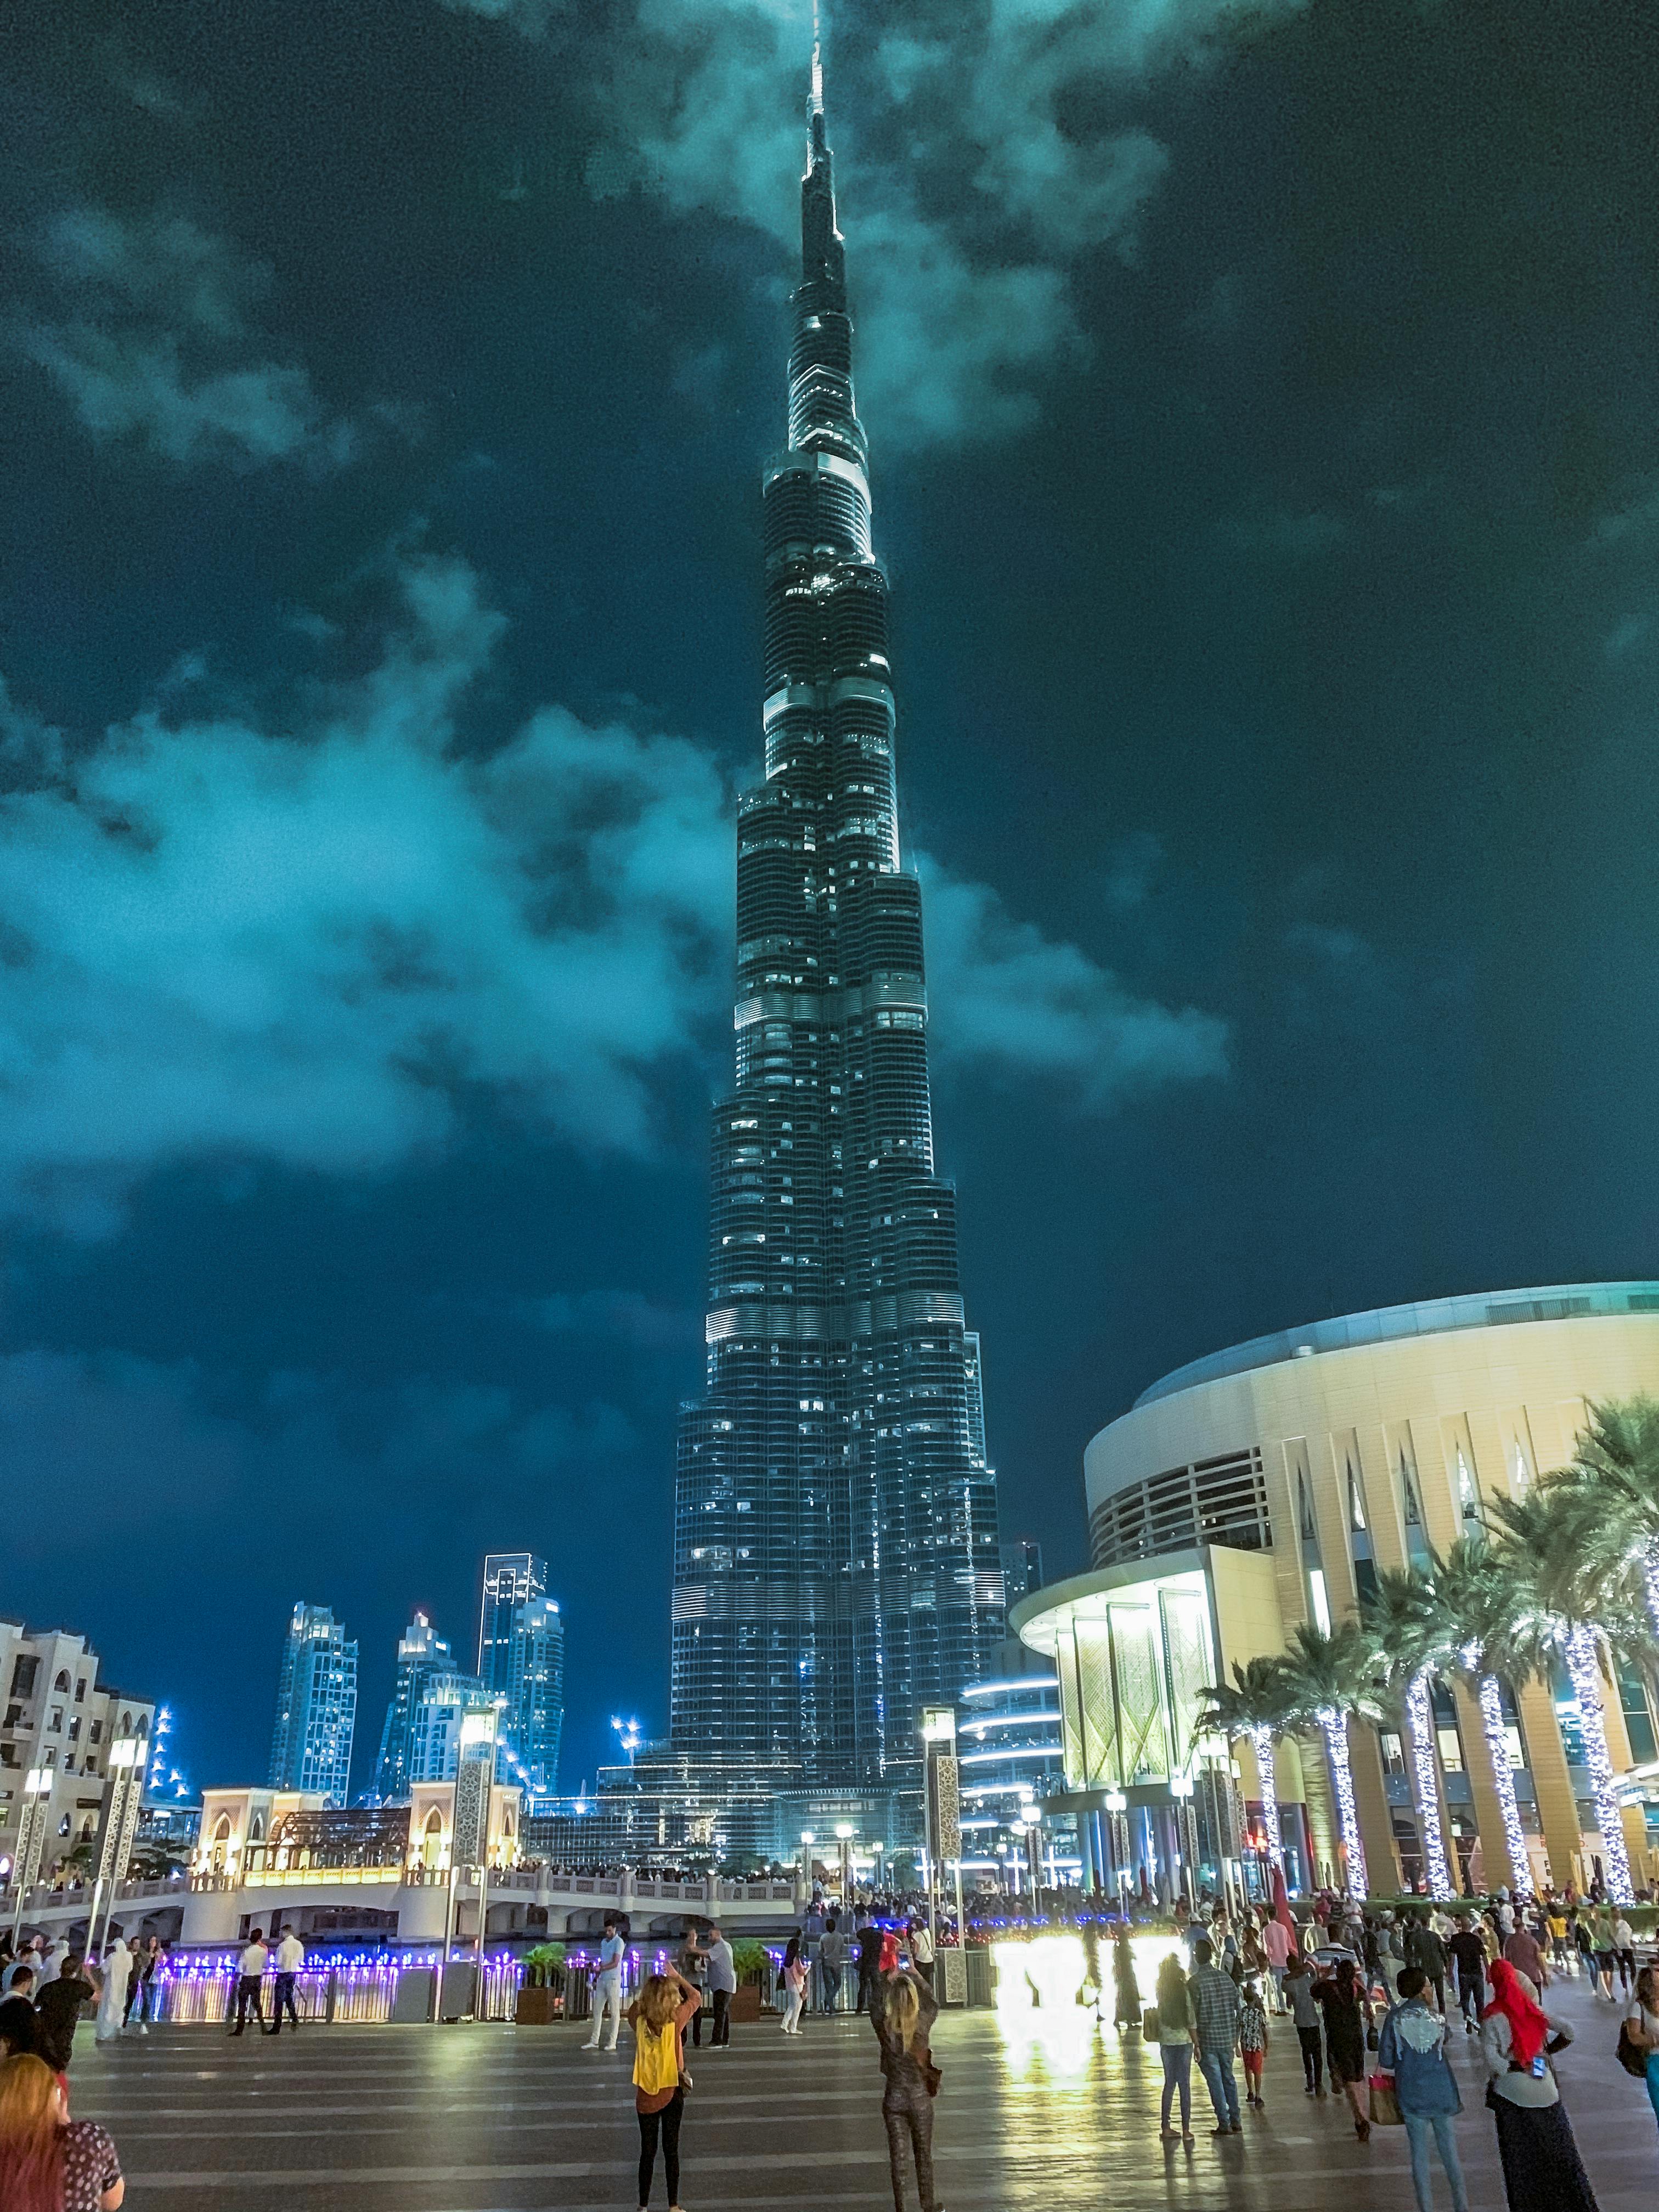 Dubai 4K wallpapers for your desktop or mobile screen free and easy to  download